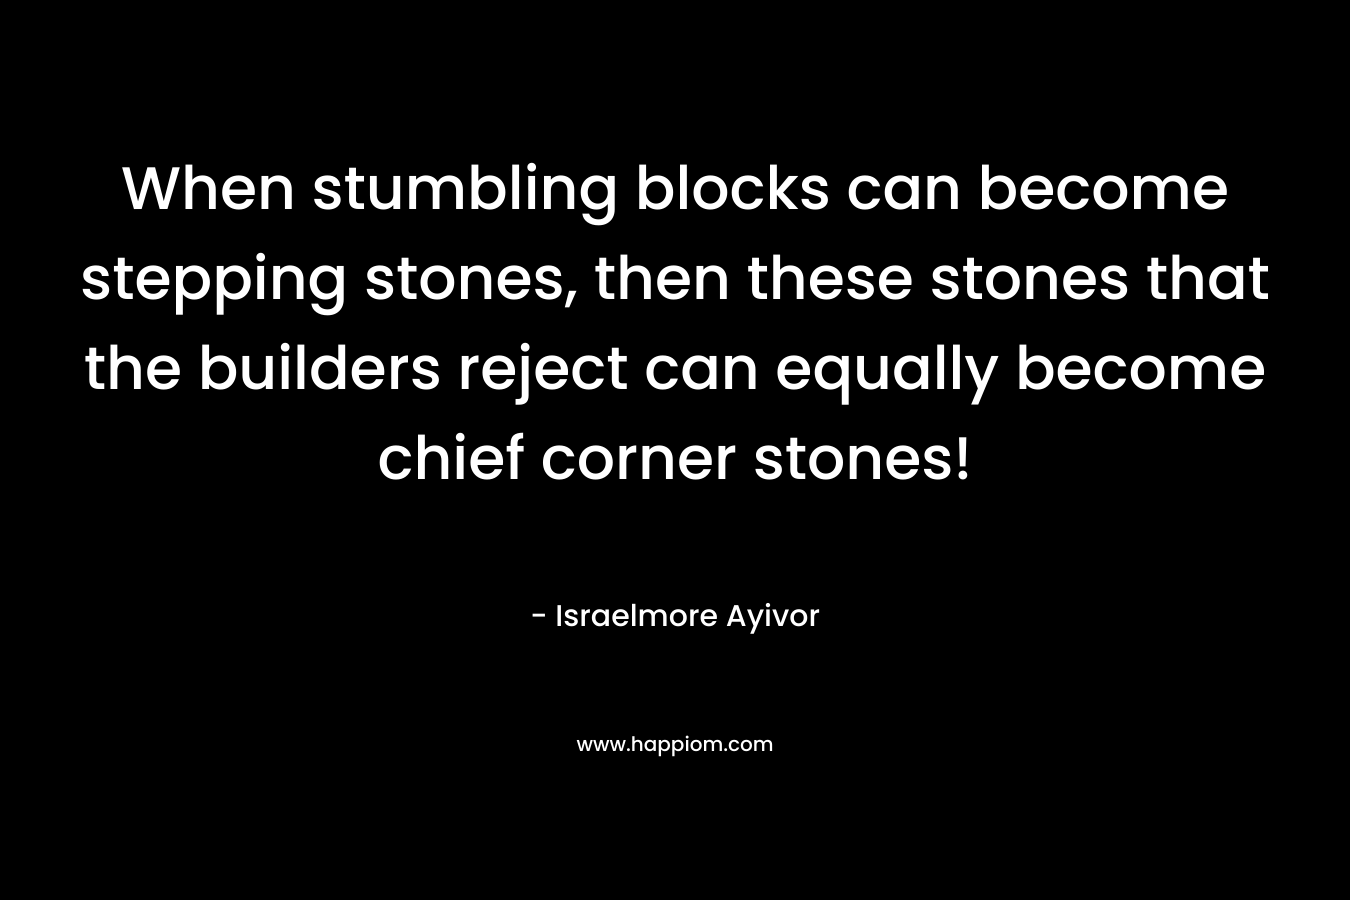 When stumbling blocks can become stepping stones, then these stones that the builders reject can equally become chief corner stones!